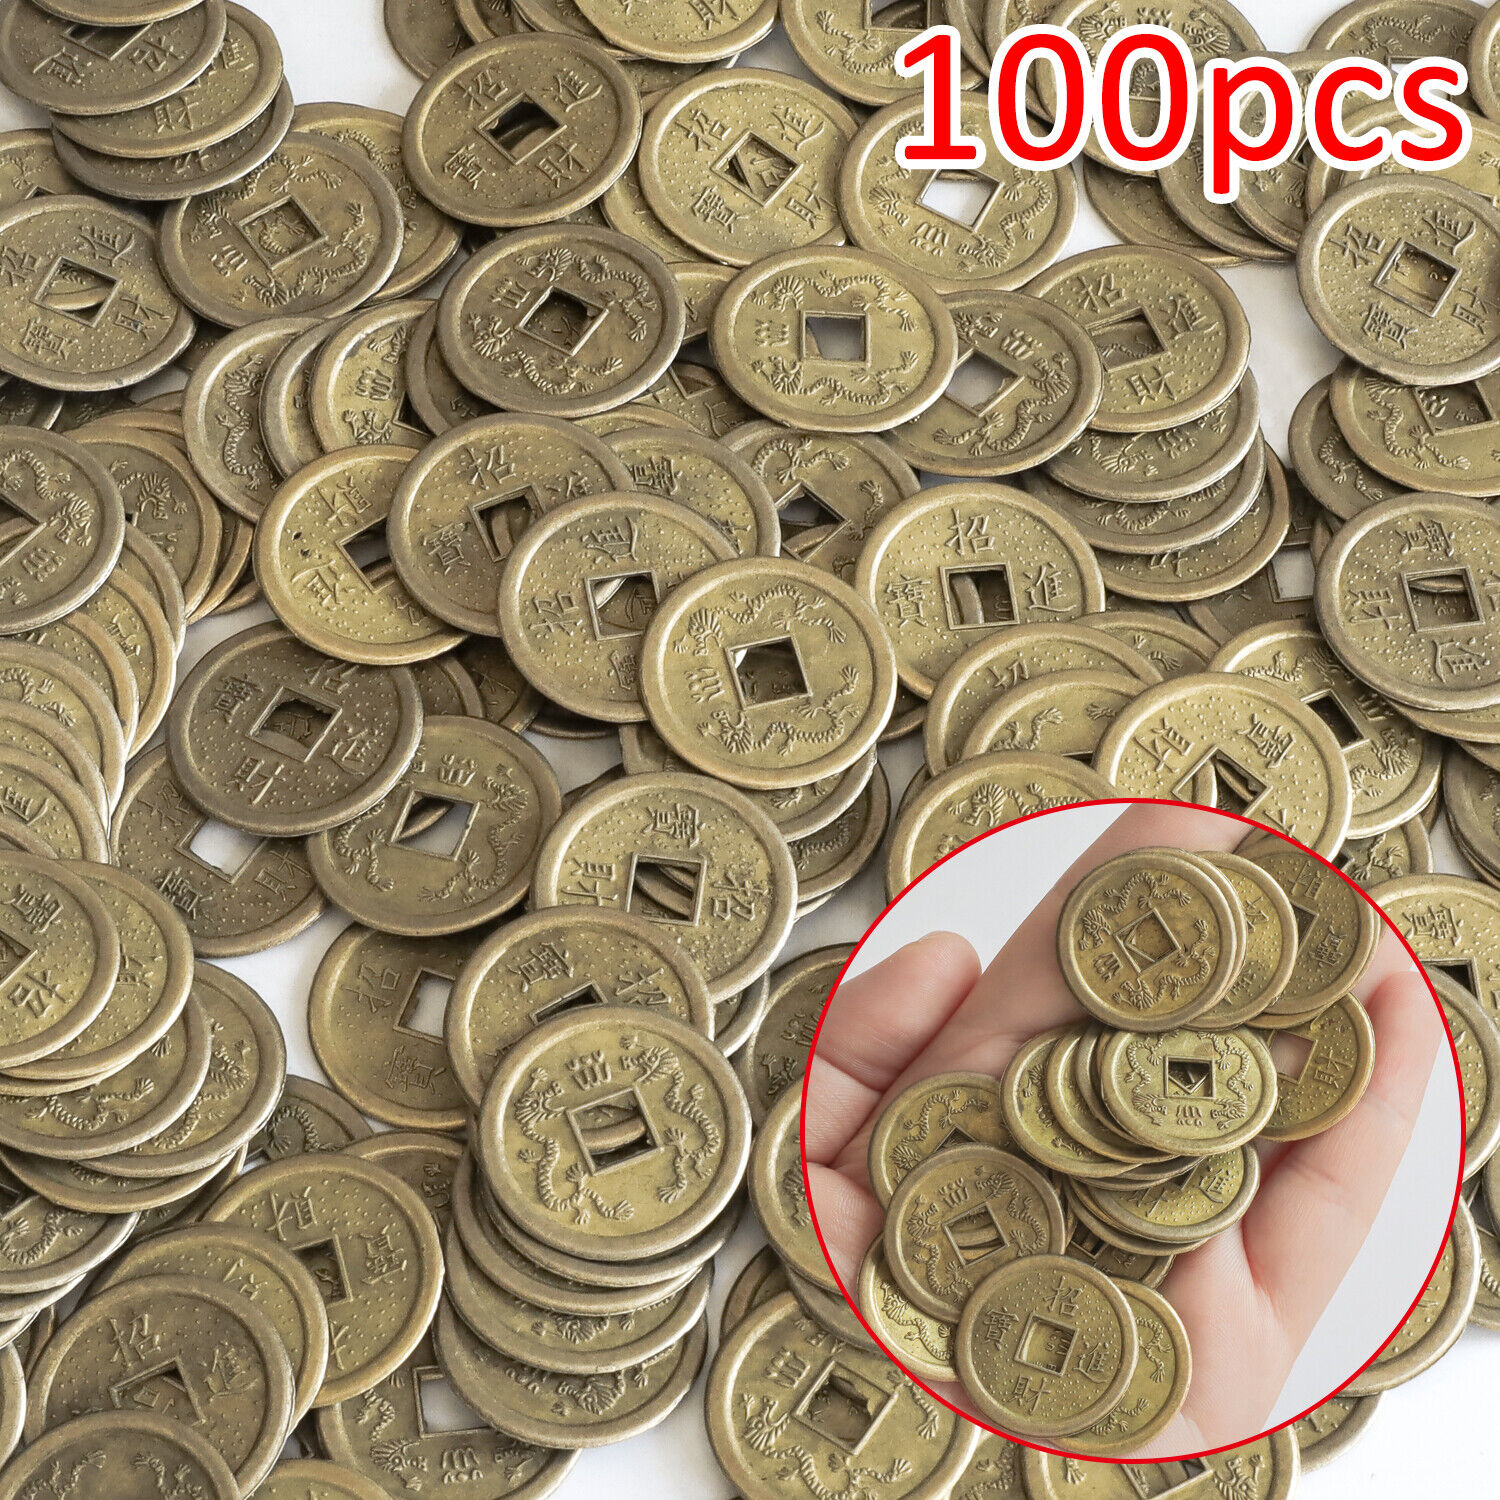 100pcs Feng Shui Coin 0.78" Lucky Chinese Fortune Ancient Ching Souvenirs